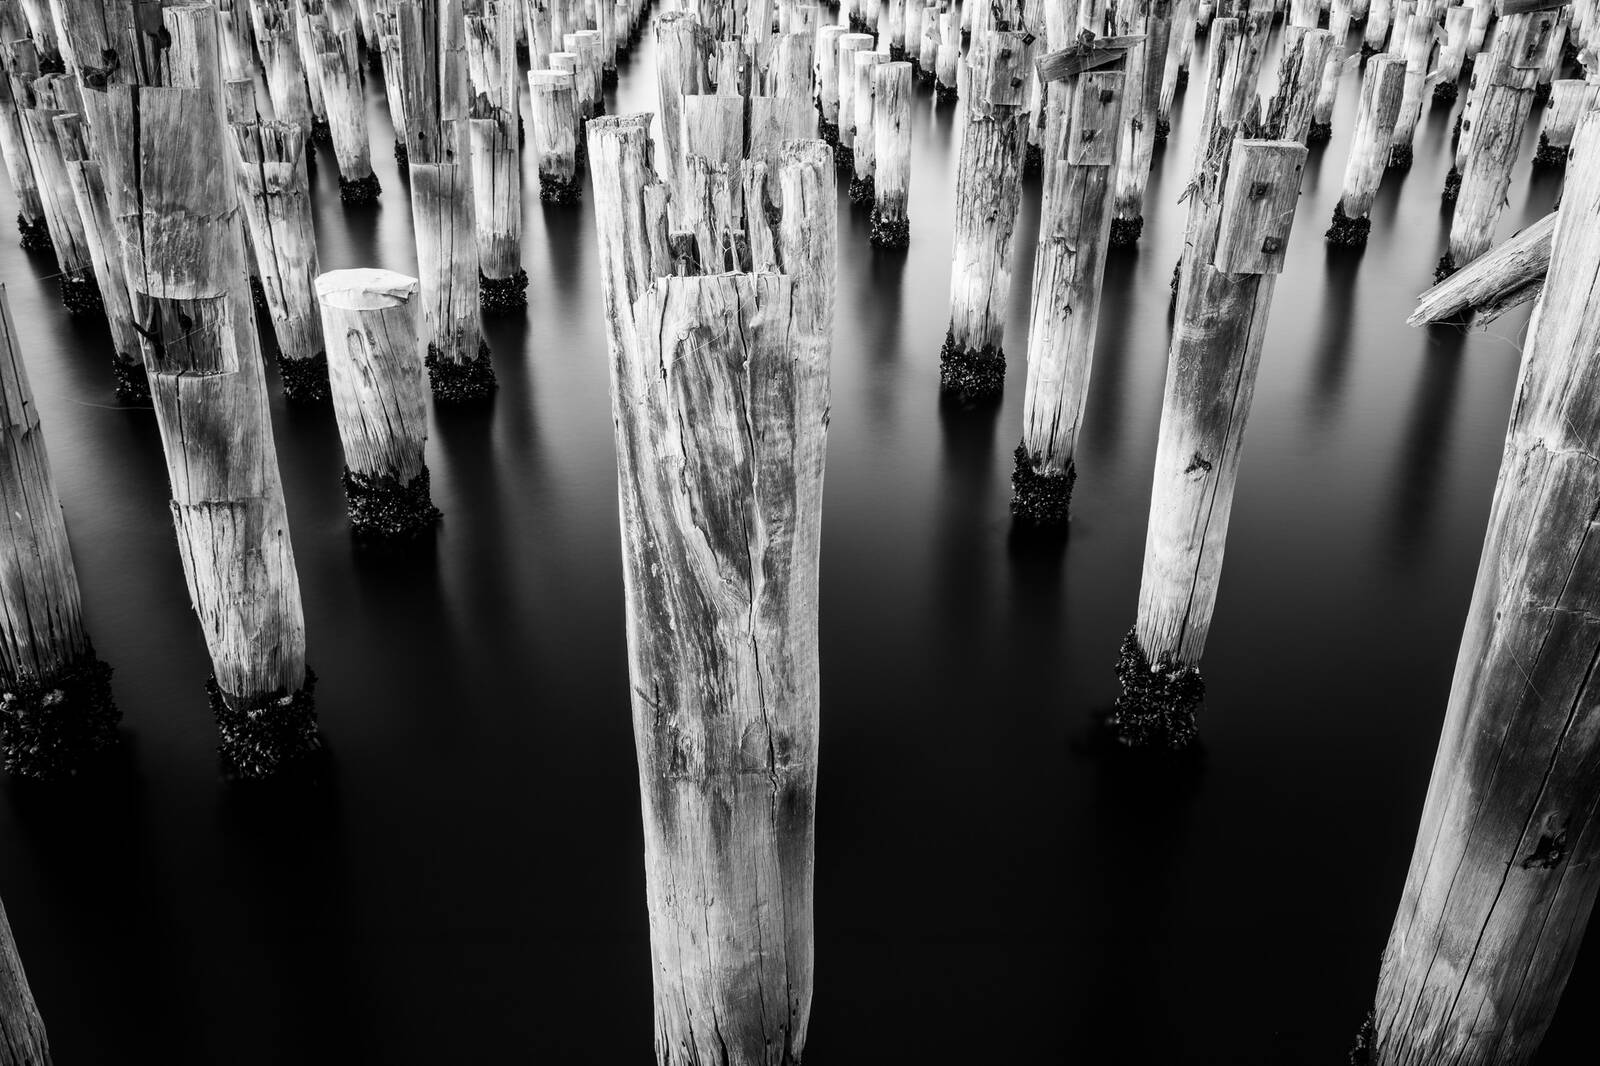 Image of Princes Pier, Melbourne by Thom Newman